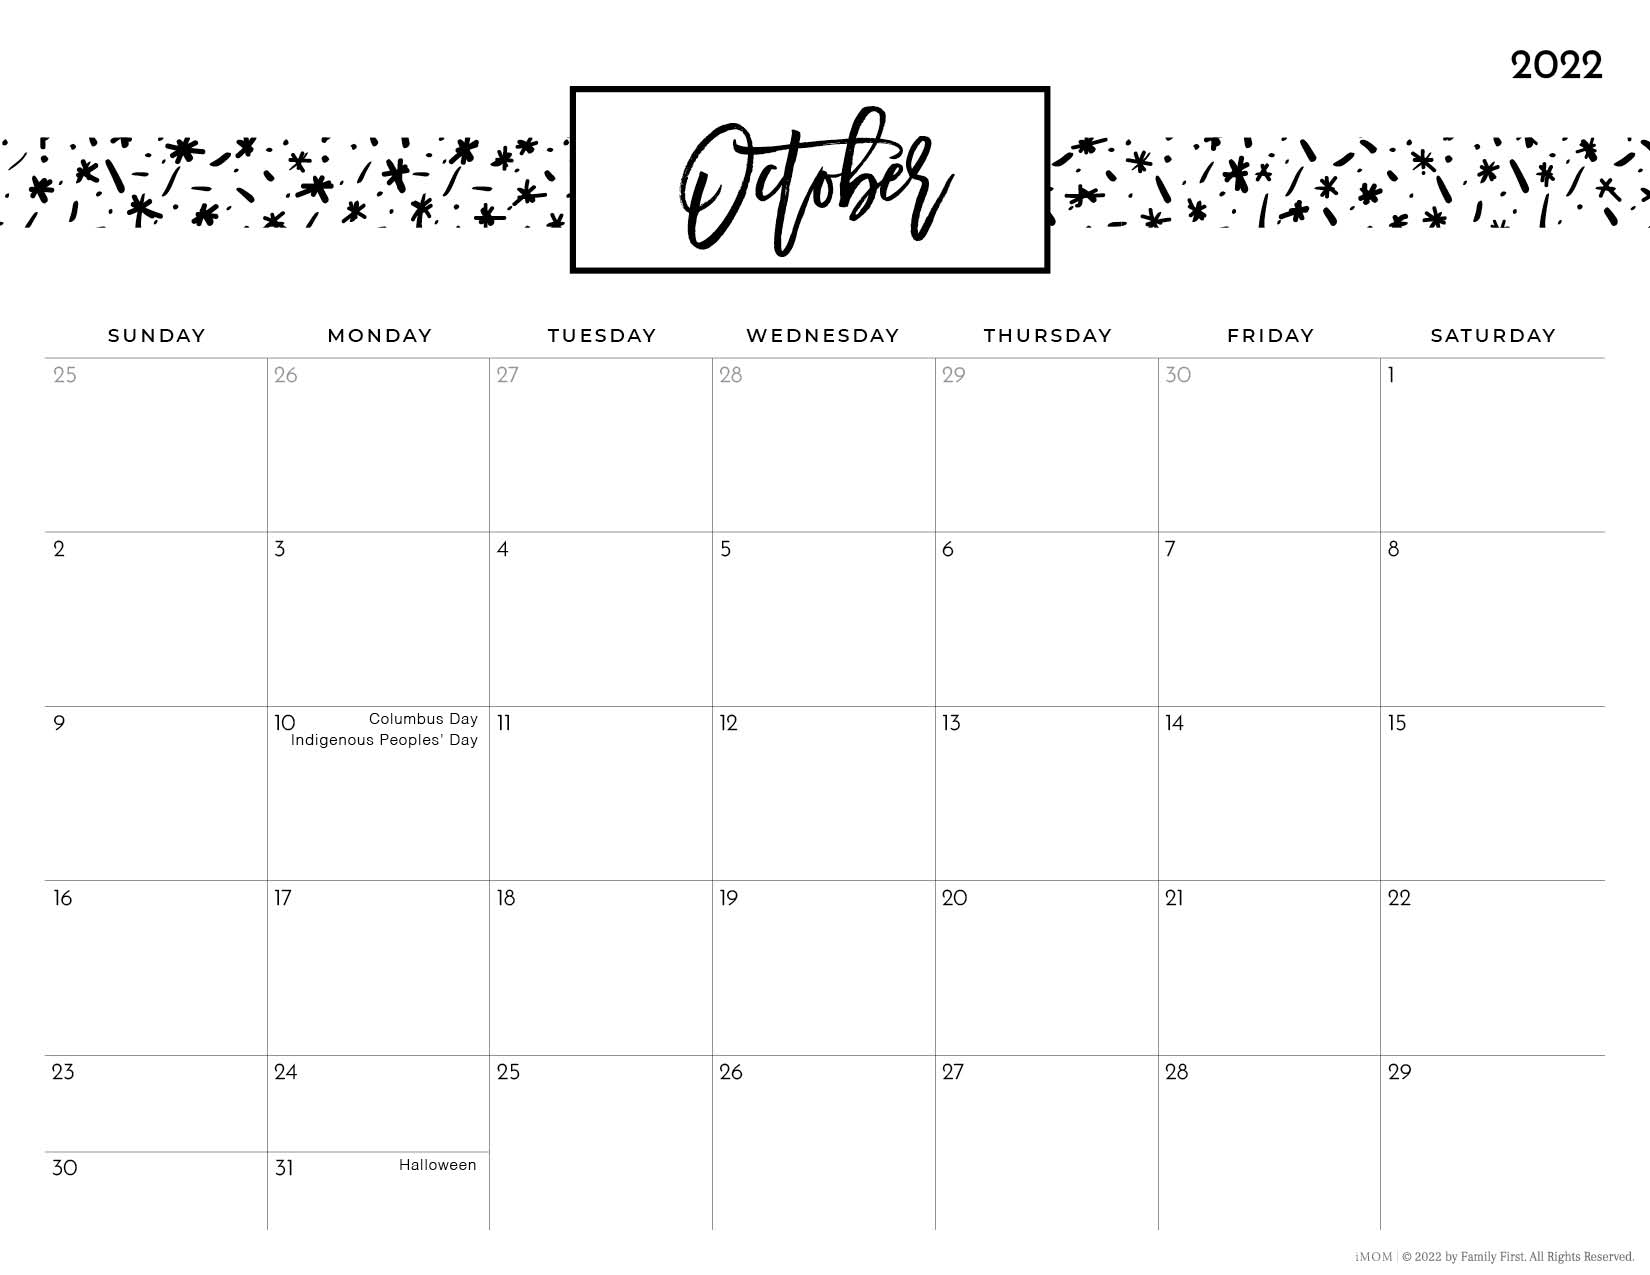 2021 and 2022 Pretty Patterns Printable Calendar for Moms